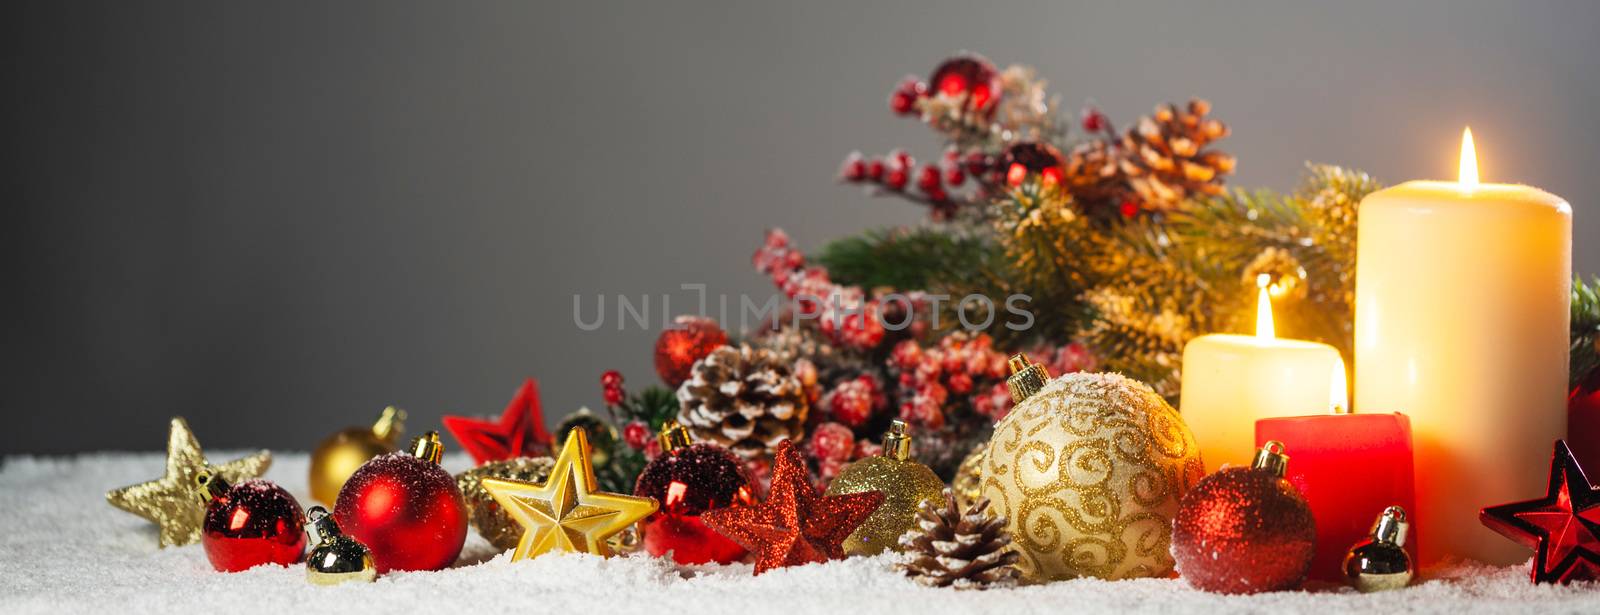 Christmas composition of colorful ornaments balls stars candles and fir tree branches on snow